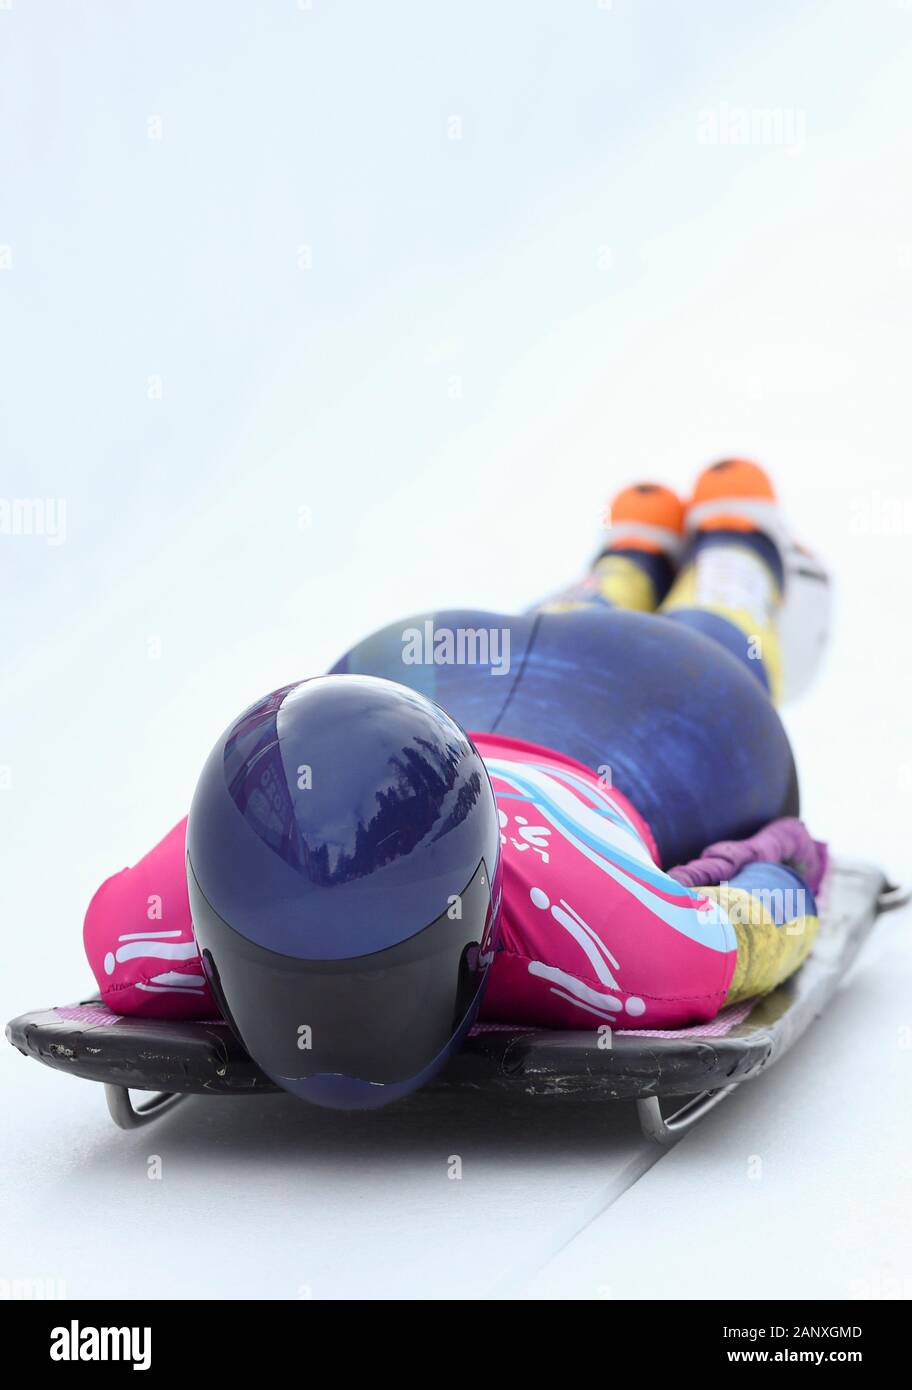 St. Moritz, Switzerland. 19th Jan, 2020. Paulina Ewald Grondal of Sweden competes during the women's skeleton heat 2 at the 3rd Winter Youth Olympic Games in St. Moritz, Switzerland, Jan. 19, 2020. Credit: Cheng Tingting/Xinhua/Alamy Live News Stock Photo